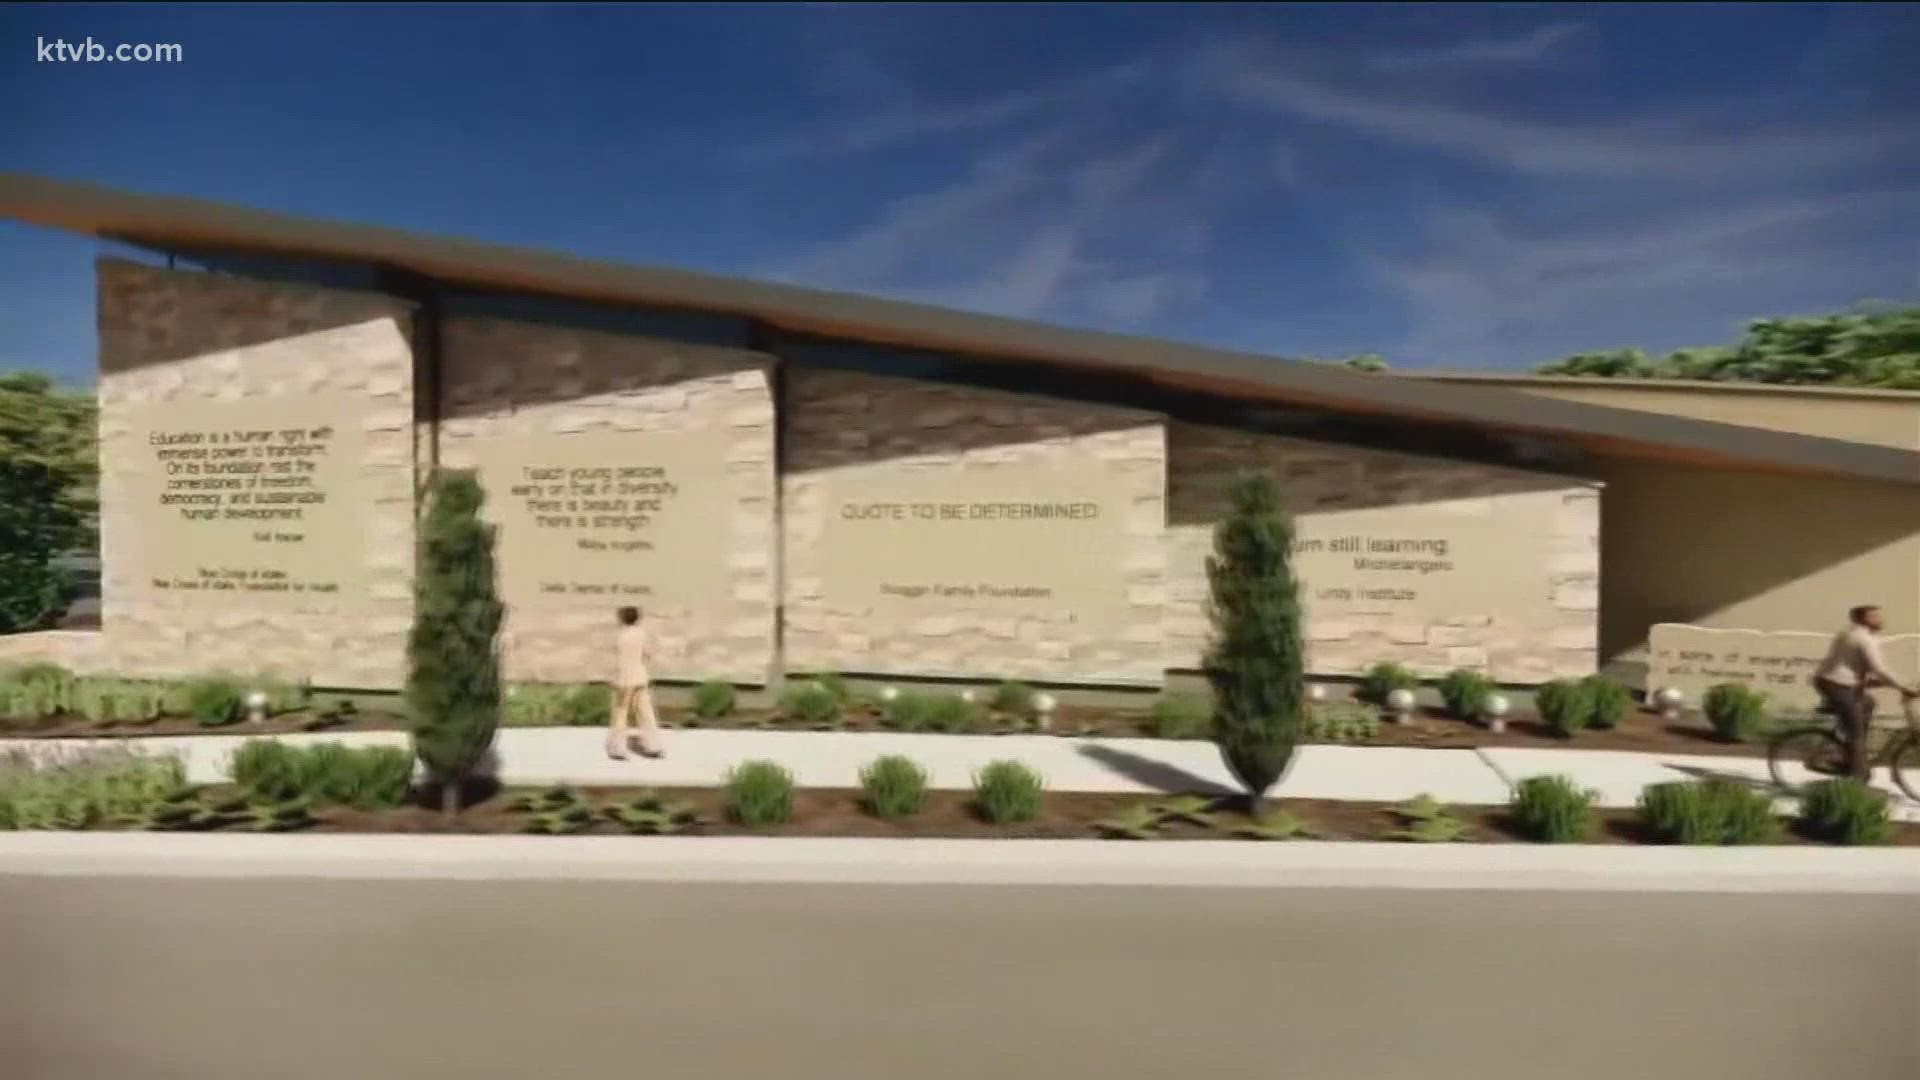 The Wassmuth Center for Human Rights recently broke ground on the building, which will be located next to the Idaho Anne Frank Human Rights Memorial.